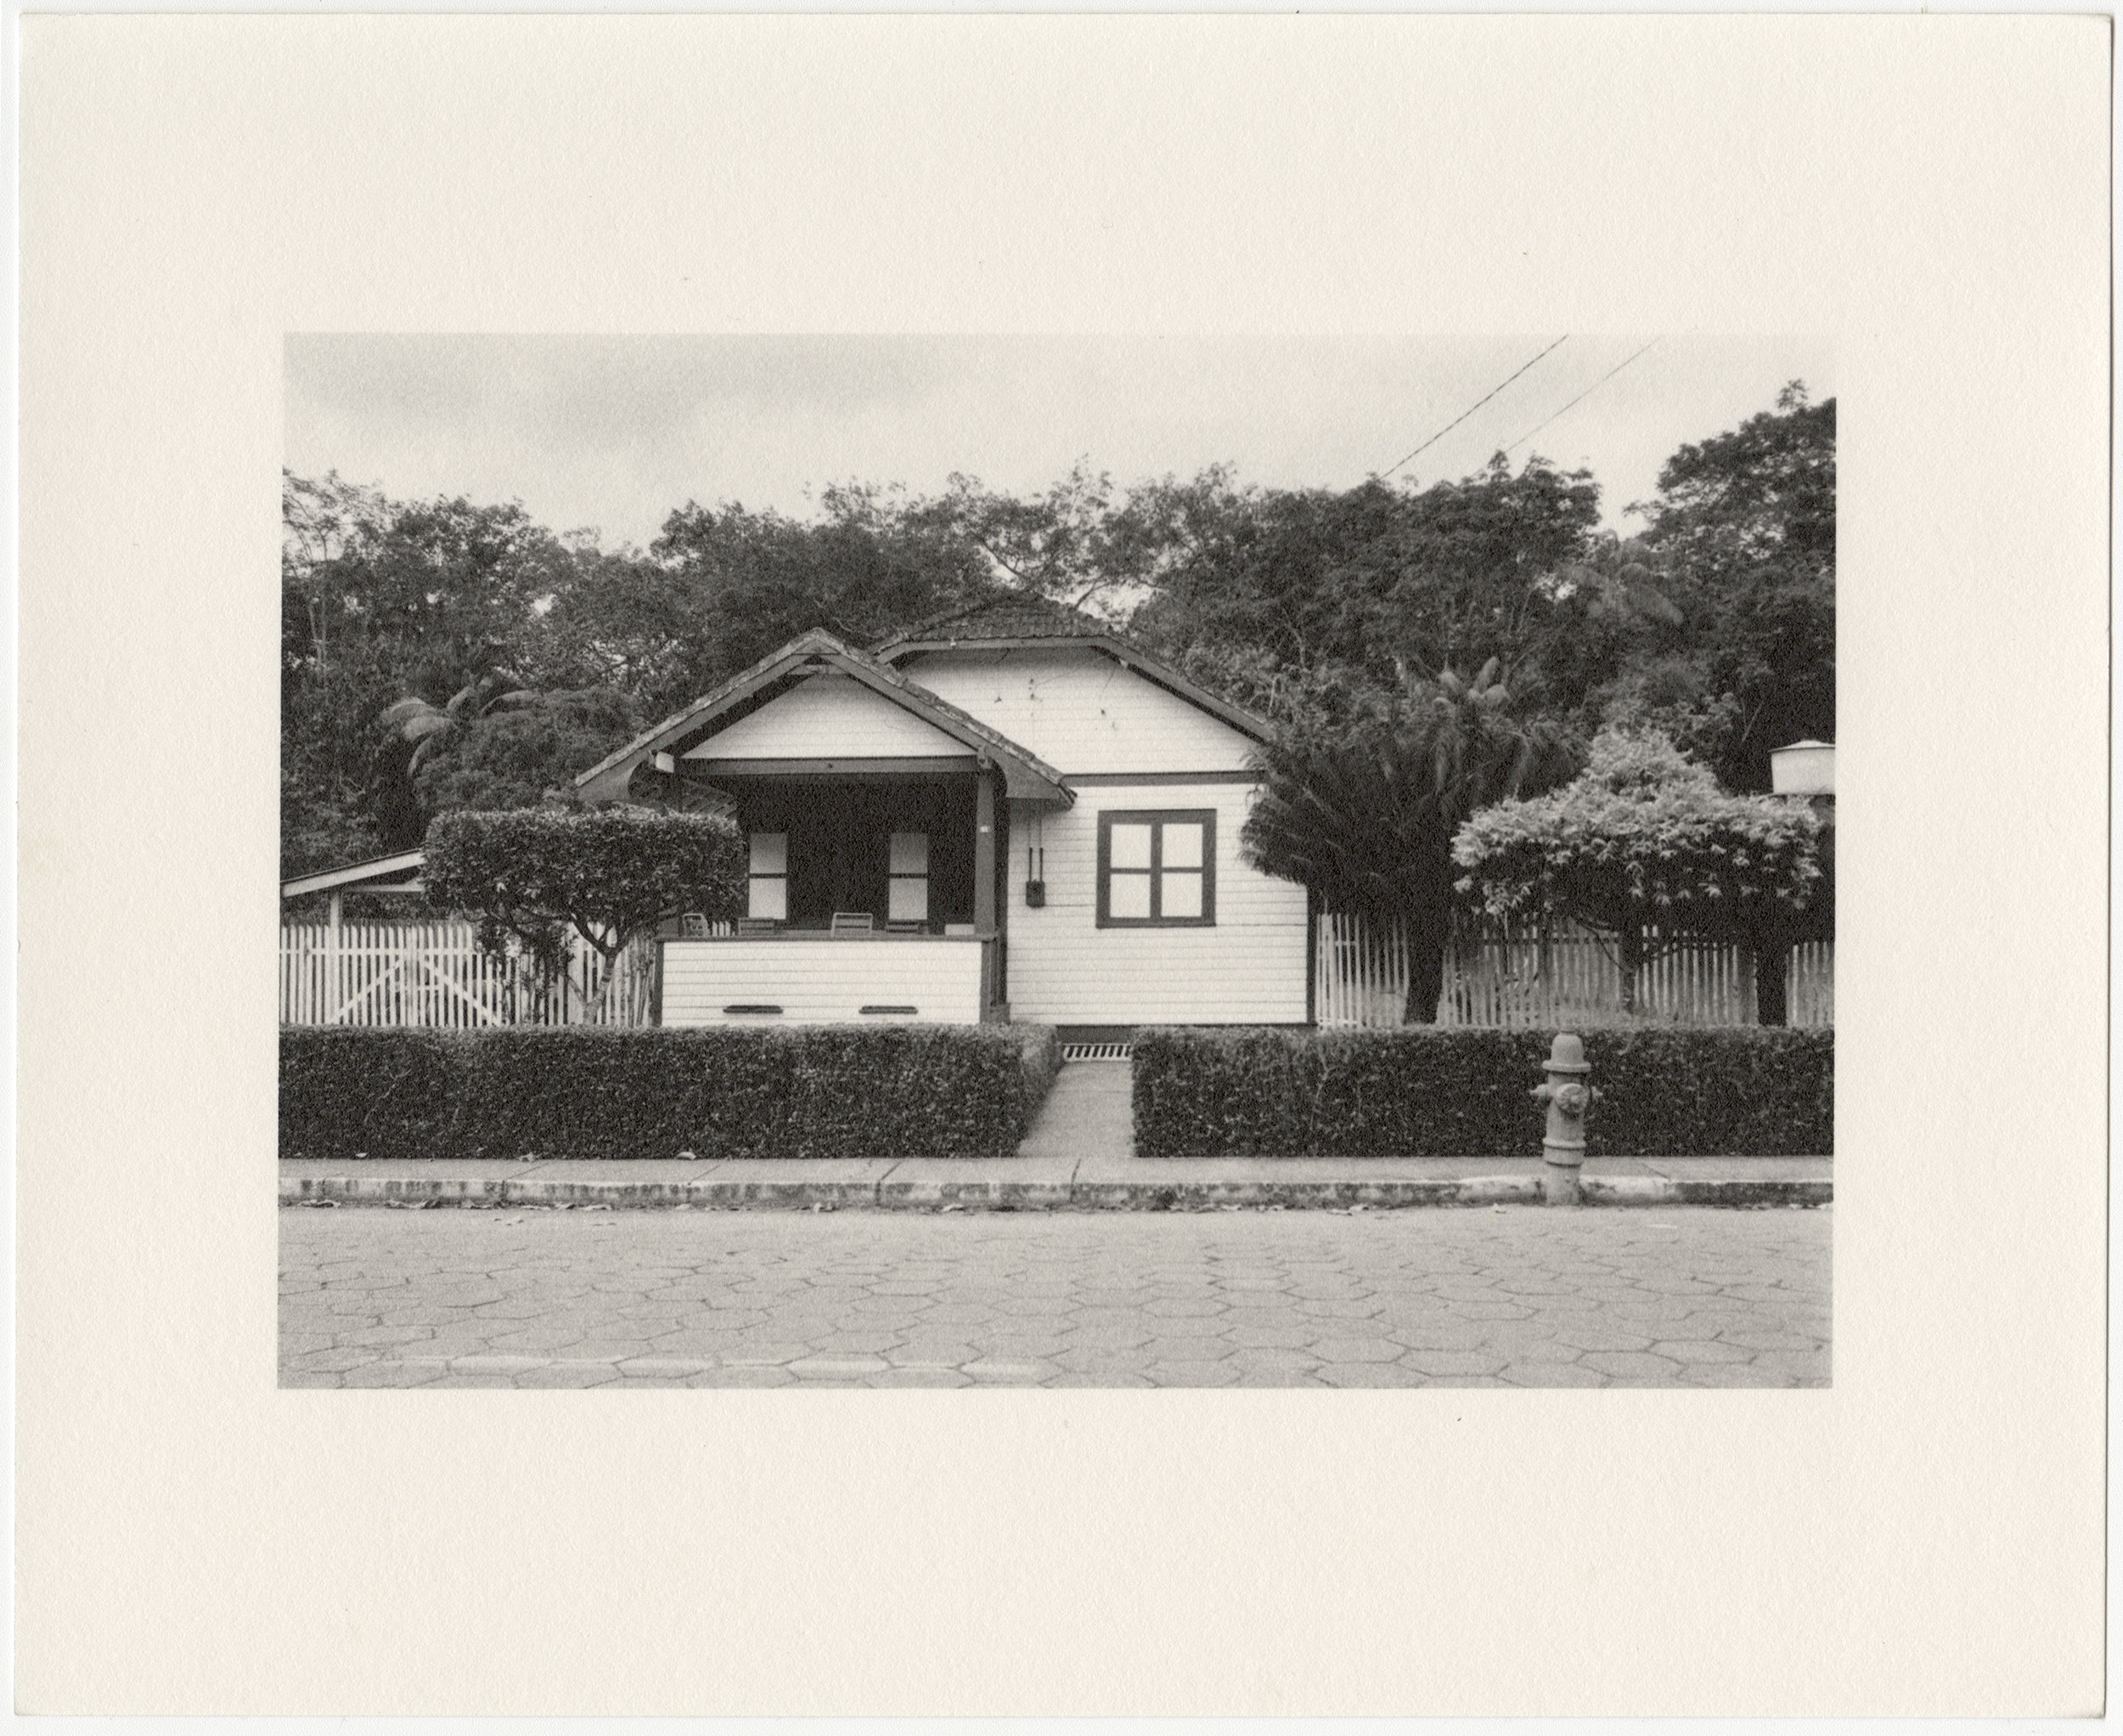  Belterra employee house with trimmed hedges and fire hydrant, built in 1934 by the Companhia Ford Industrial Do Brasil Ford Motor Company. 2014 Belterra, Pará, Brazil. Gelatin silver fiber print,  8” x 10”, 2014/2018 